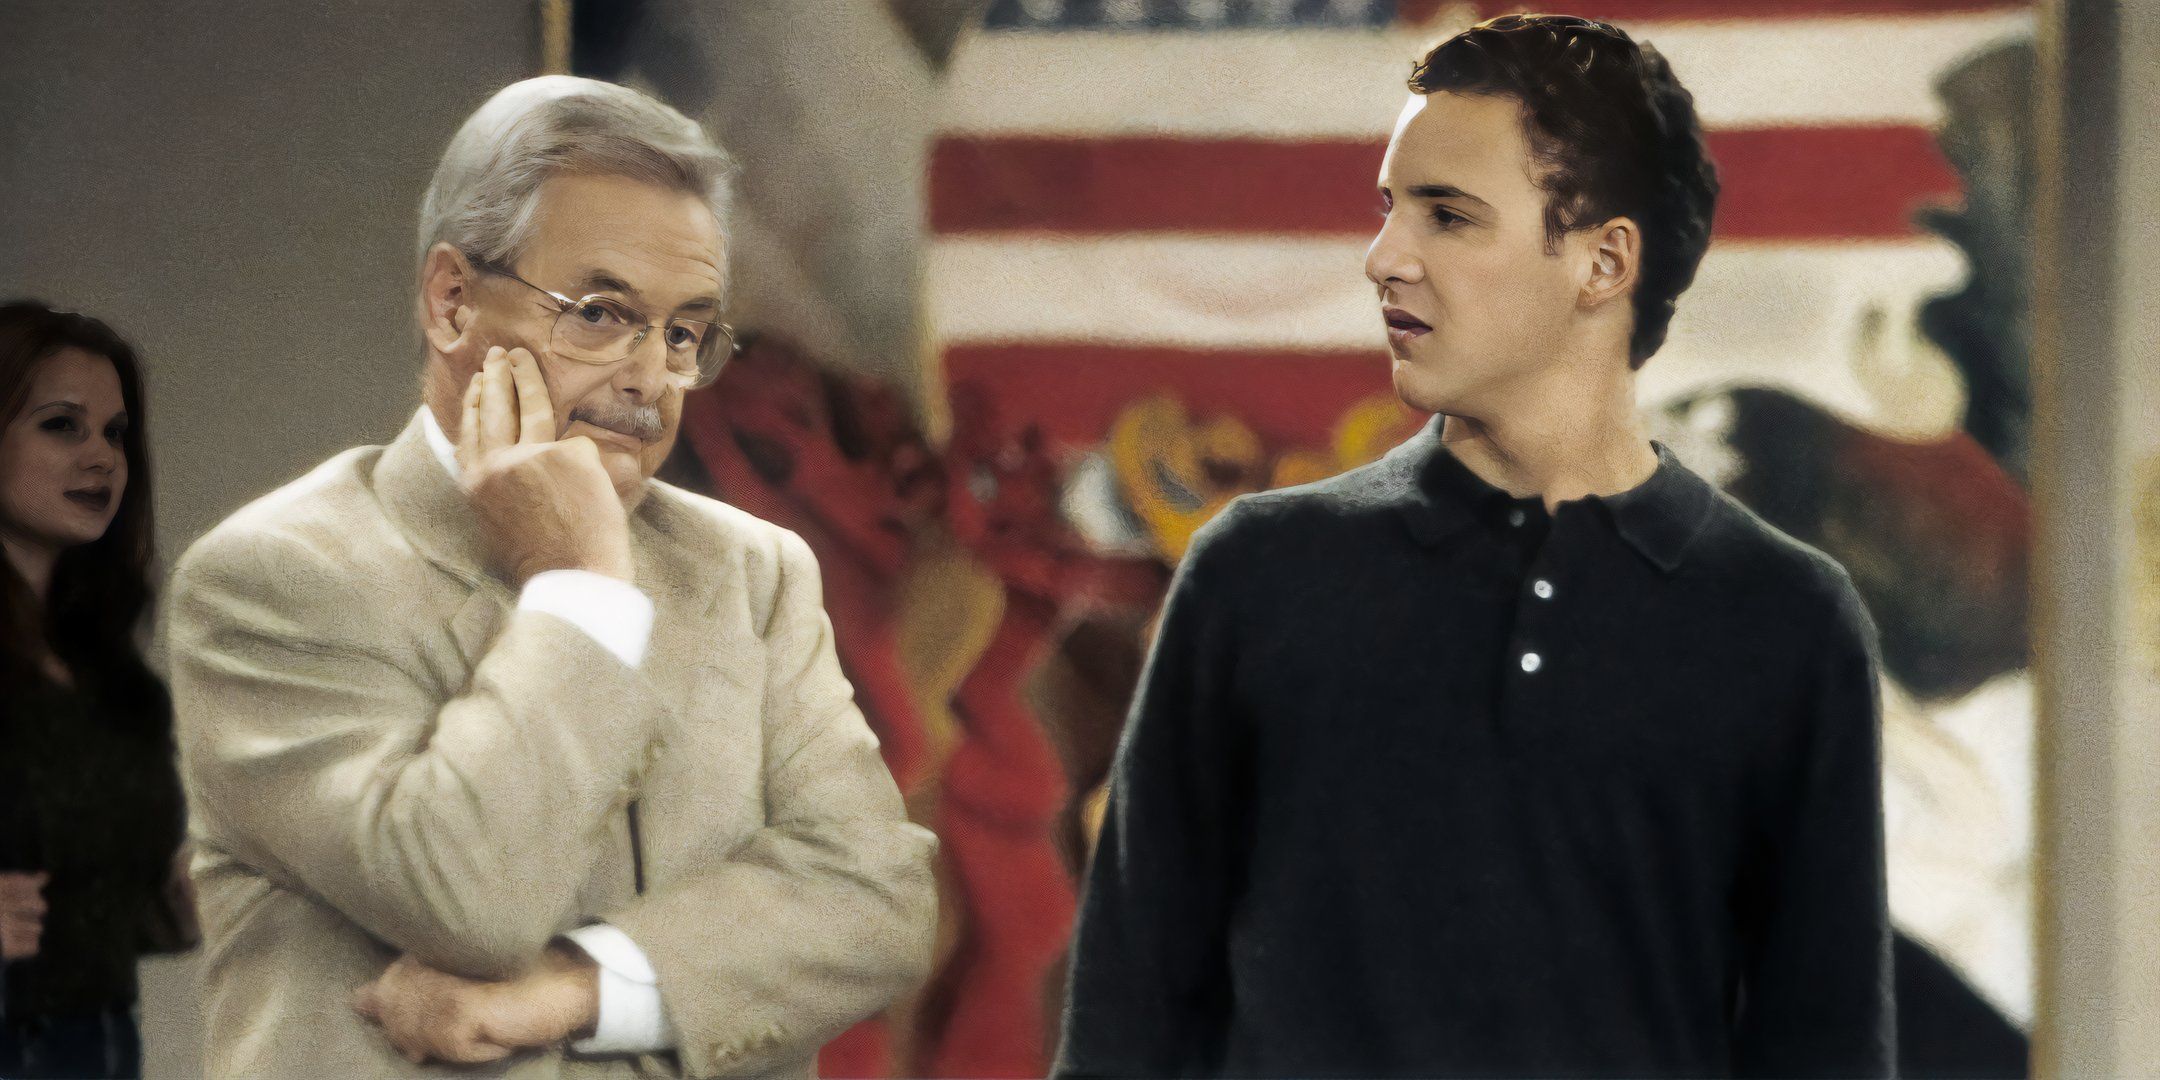 Ben Savage as Cory looking disdainfully at Mr. Feeny in Boy Meets World